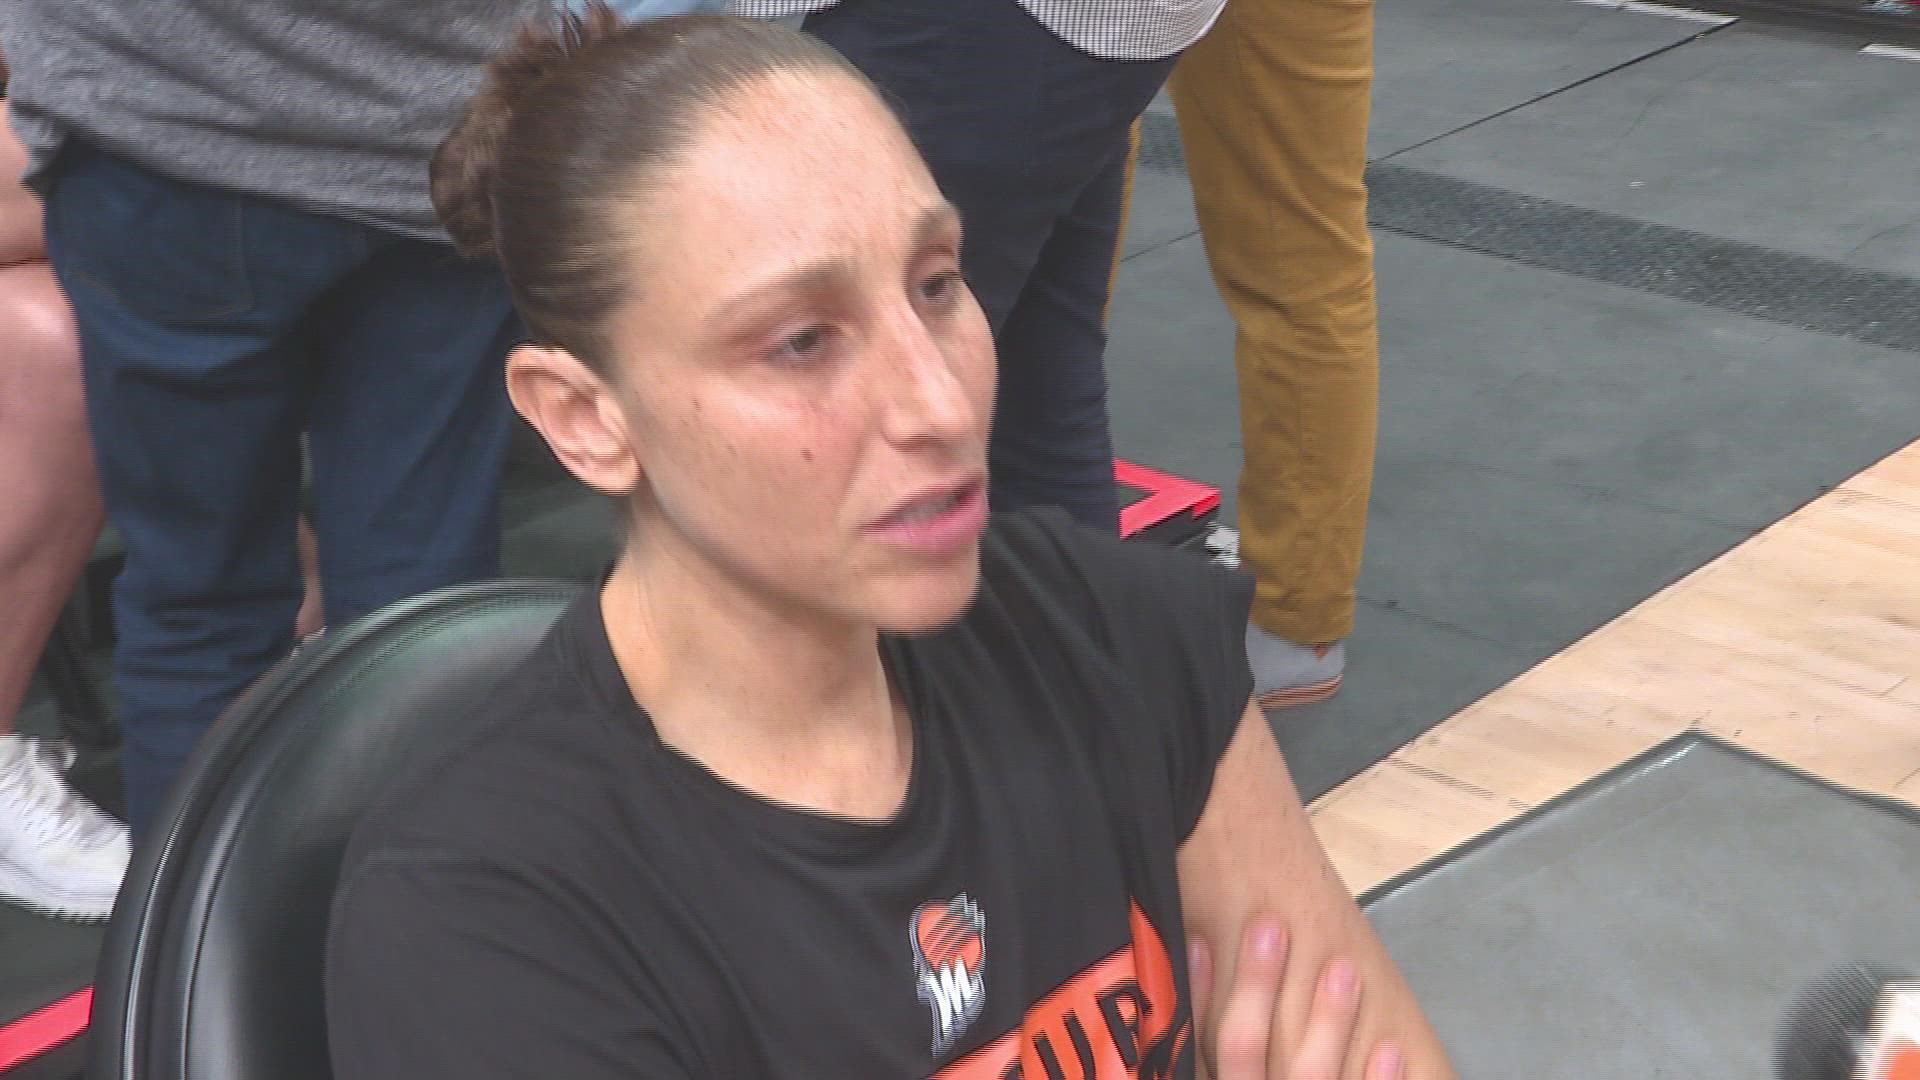 Phoenix Mercury guard Diana Taurasi told ESPN her team "didn't even touch the court before the Finals."